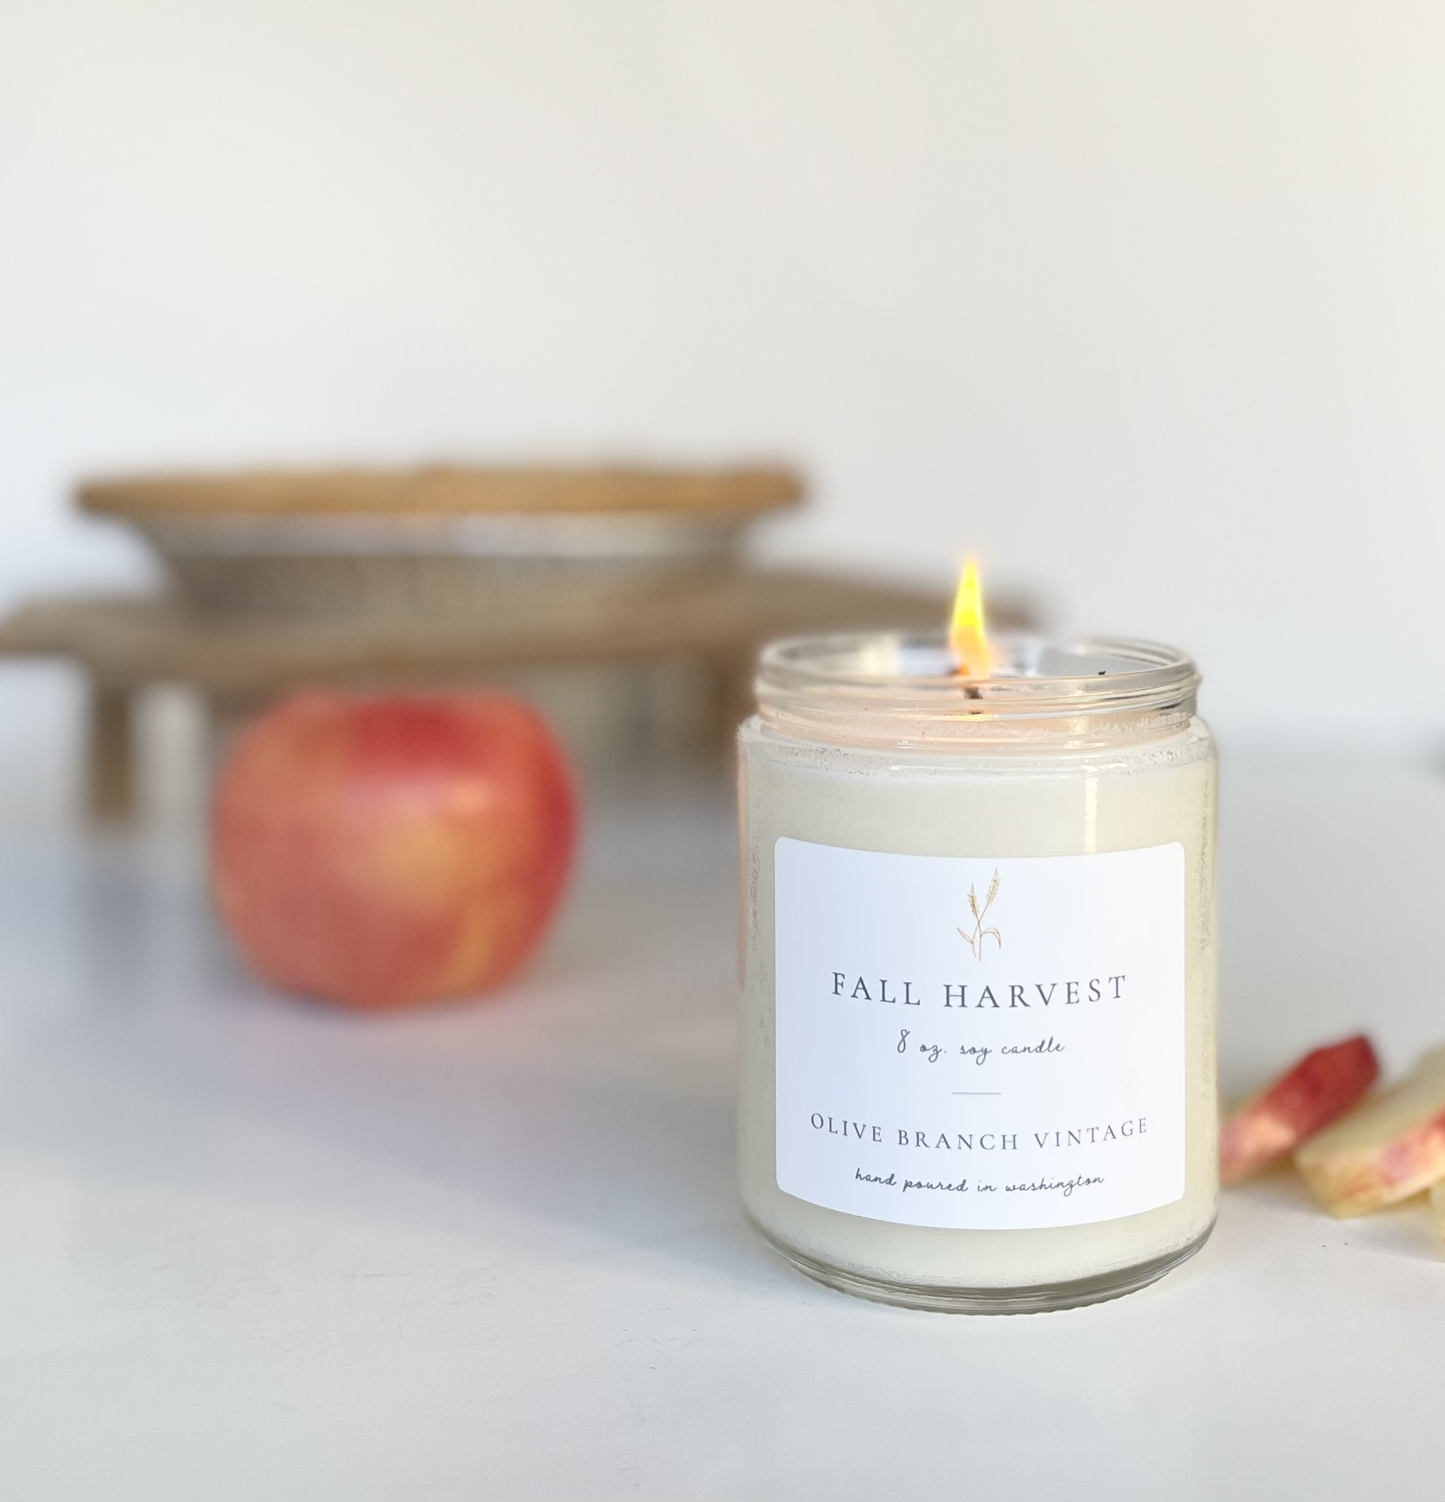 Fall Harvest 8 oz candle